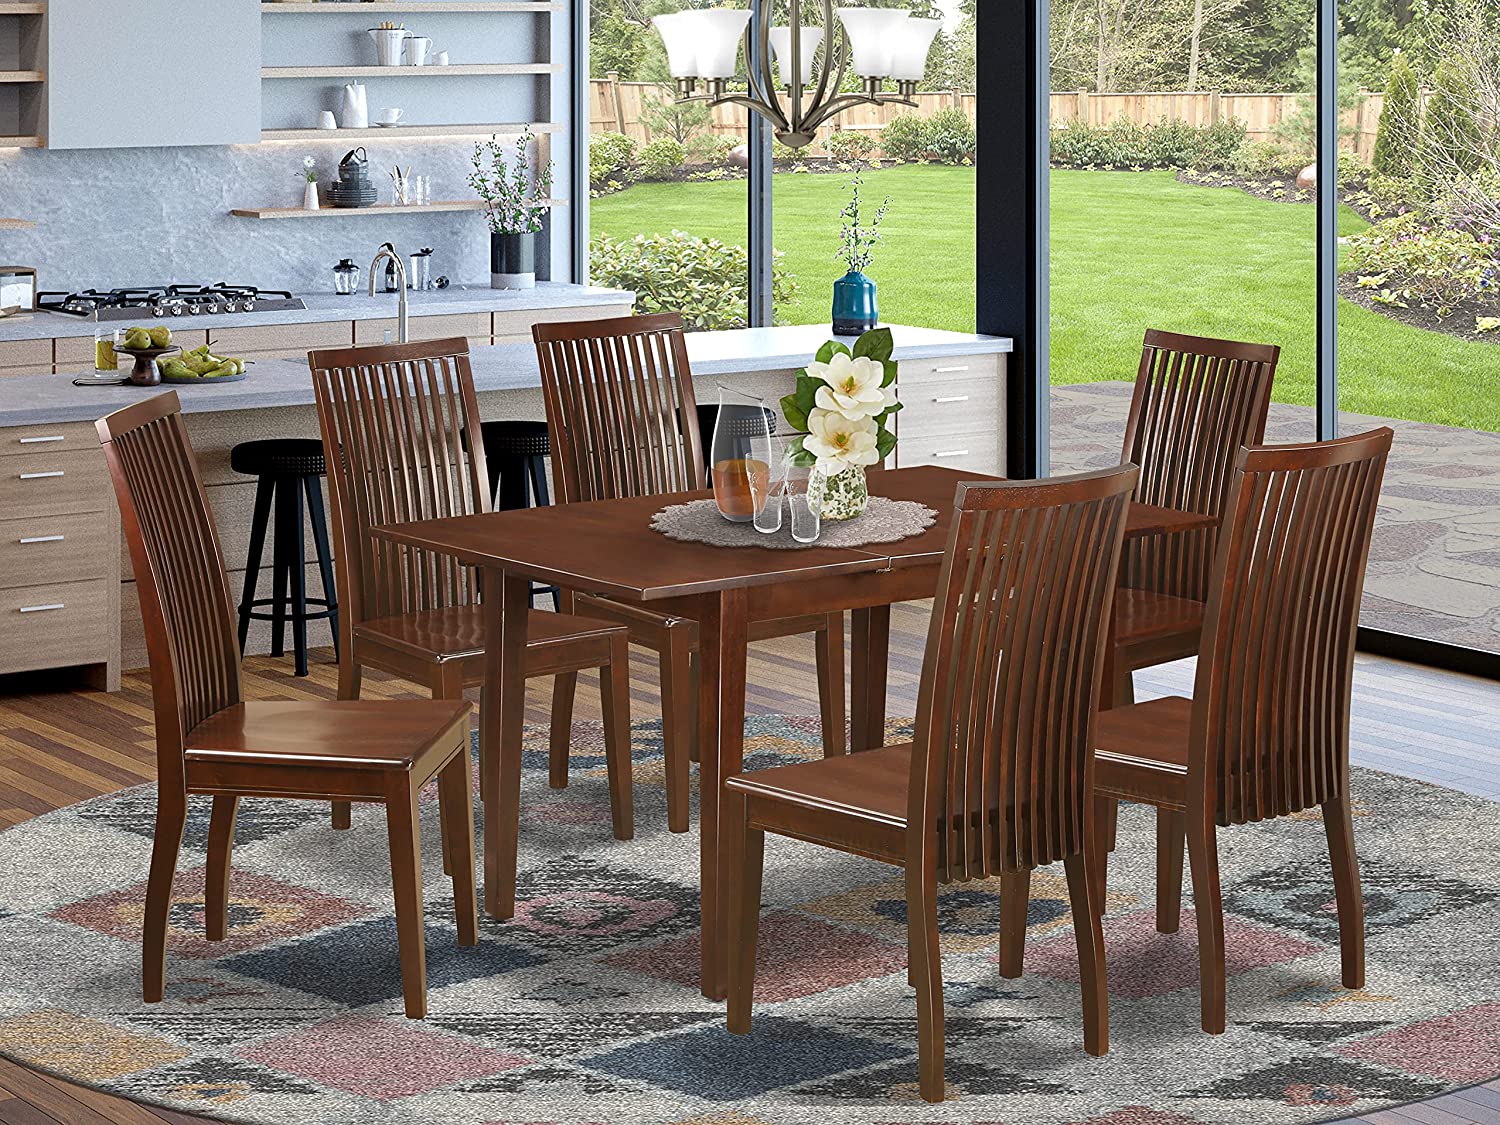 7-Piece Dinette set - Kitchen dinette table and 6 kitchen chairs